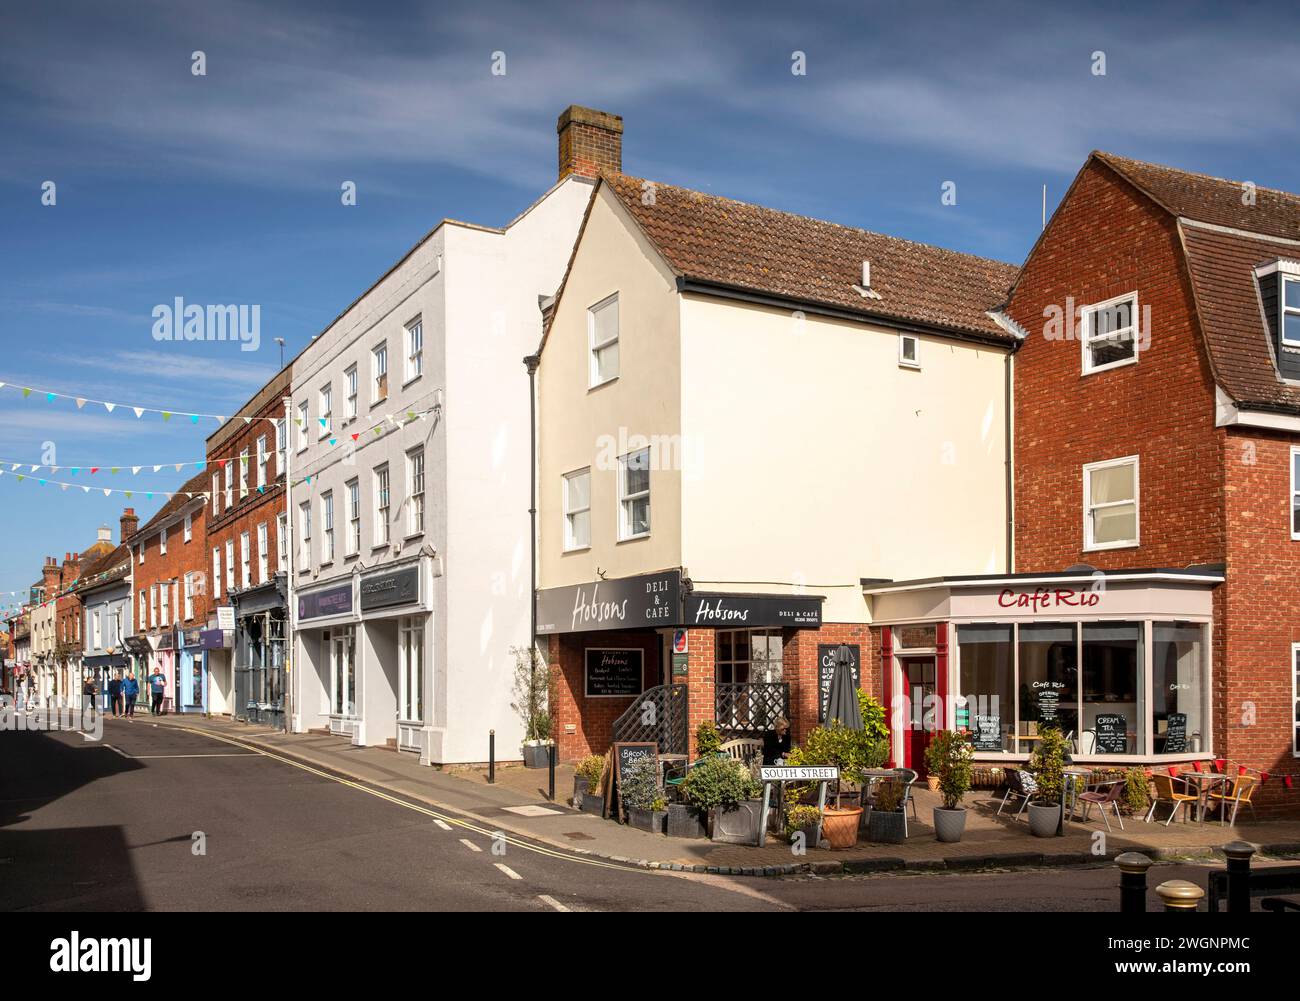 Royaume-Uni, Angleterre, Essex, Manningtree, High Street Banque D'Images